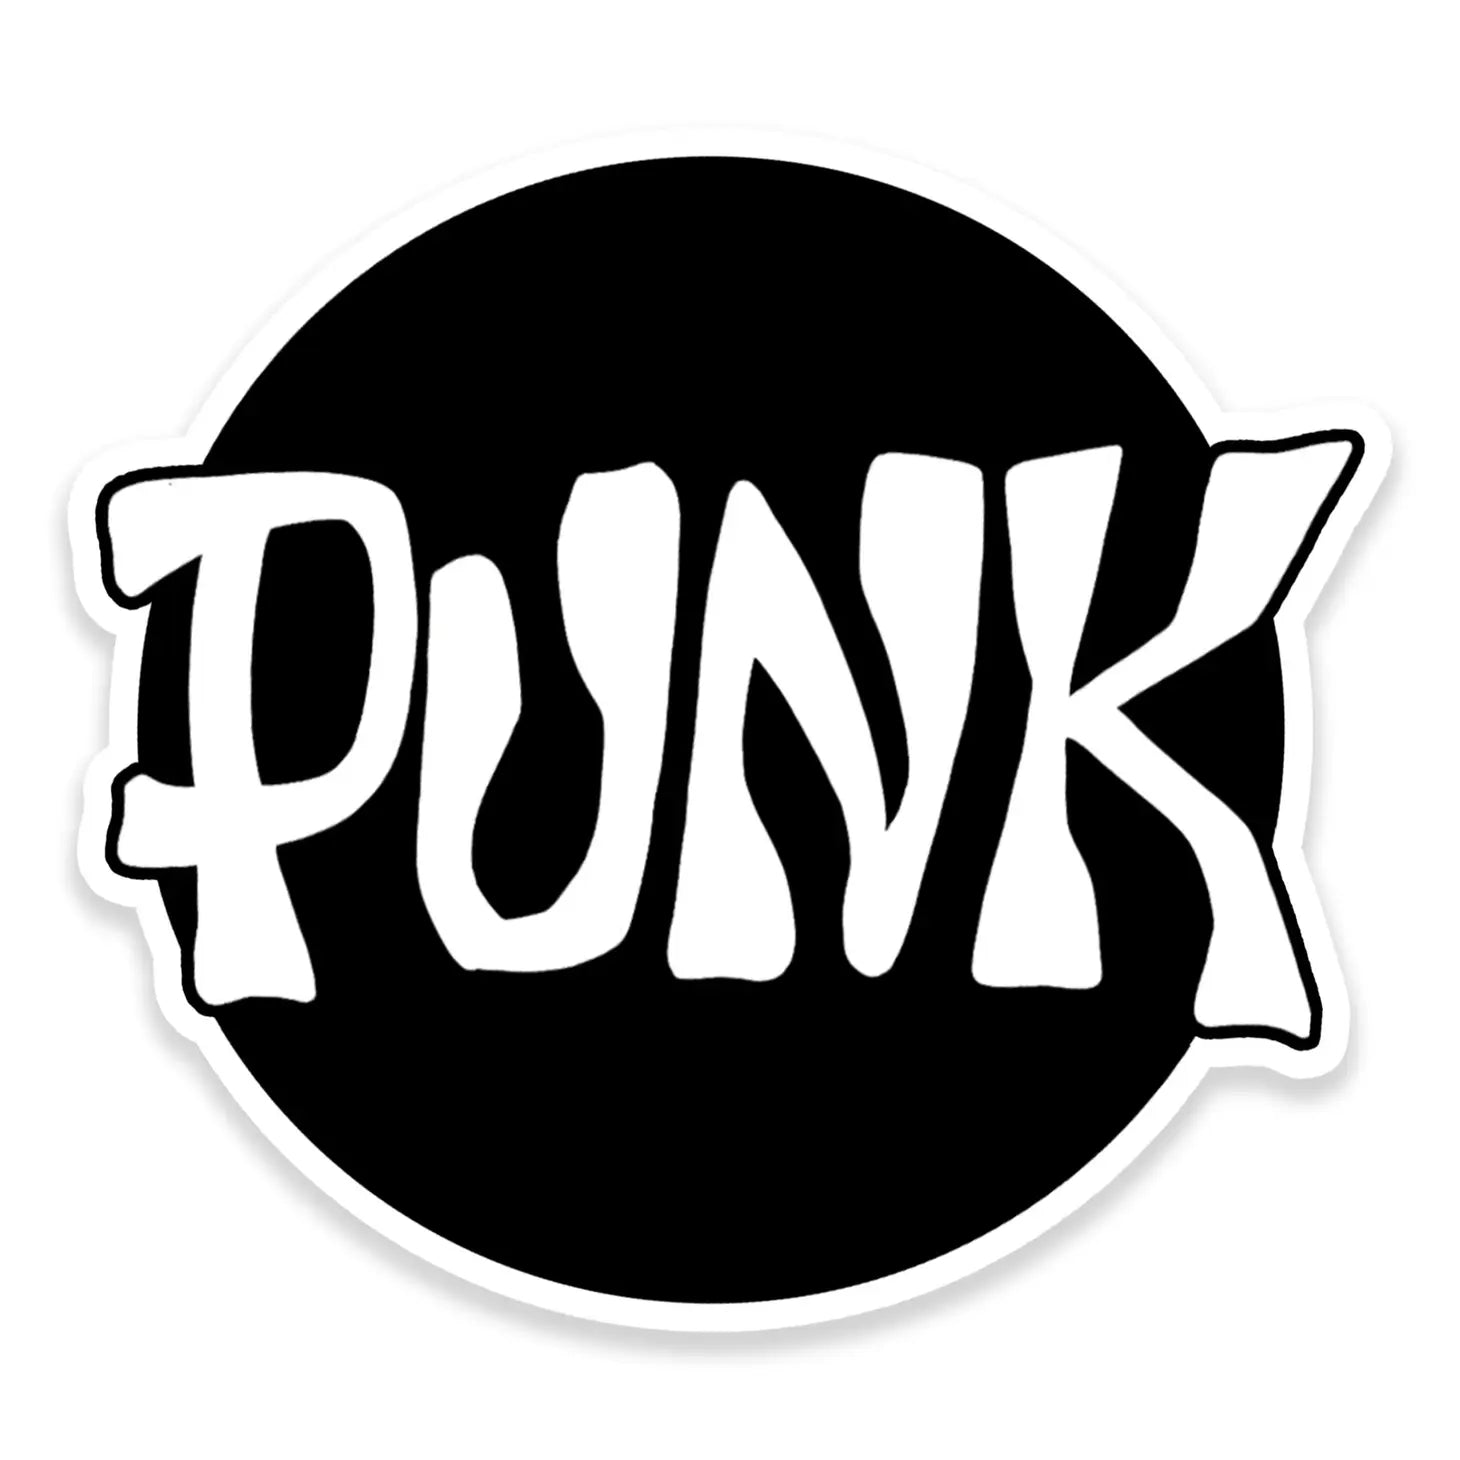 black and white die-cut vinyl sticker with a logo for the 1976 to 1979 zine from New York City that popularized the term “punk rock”